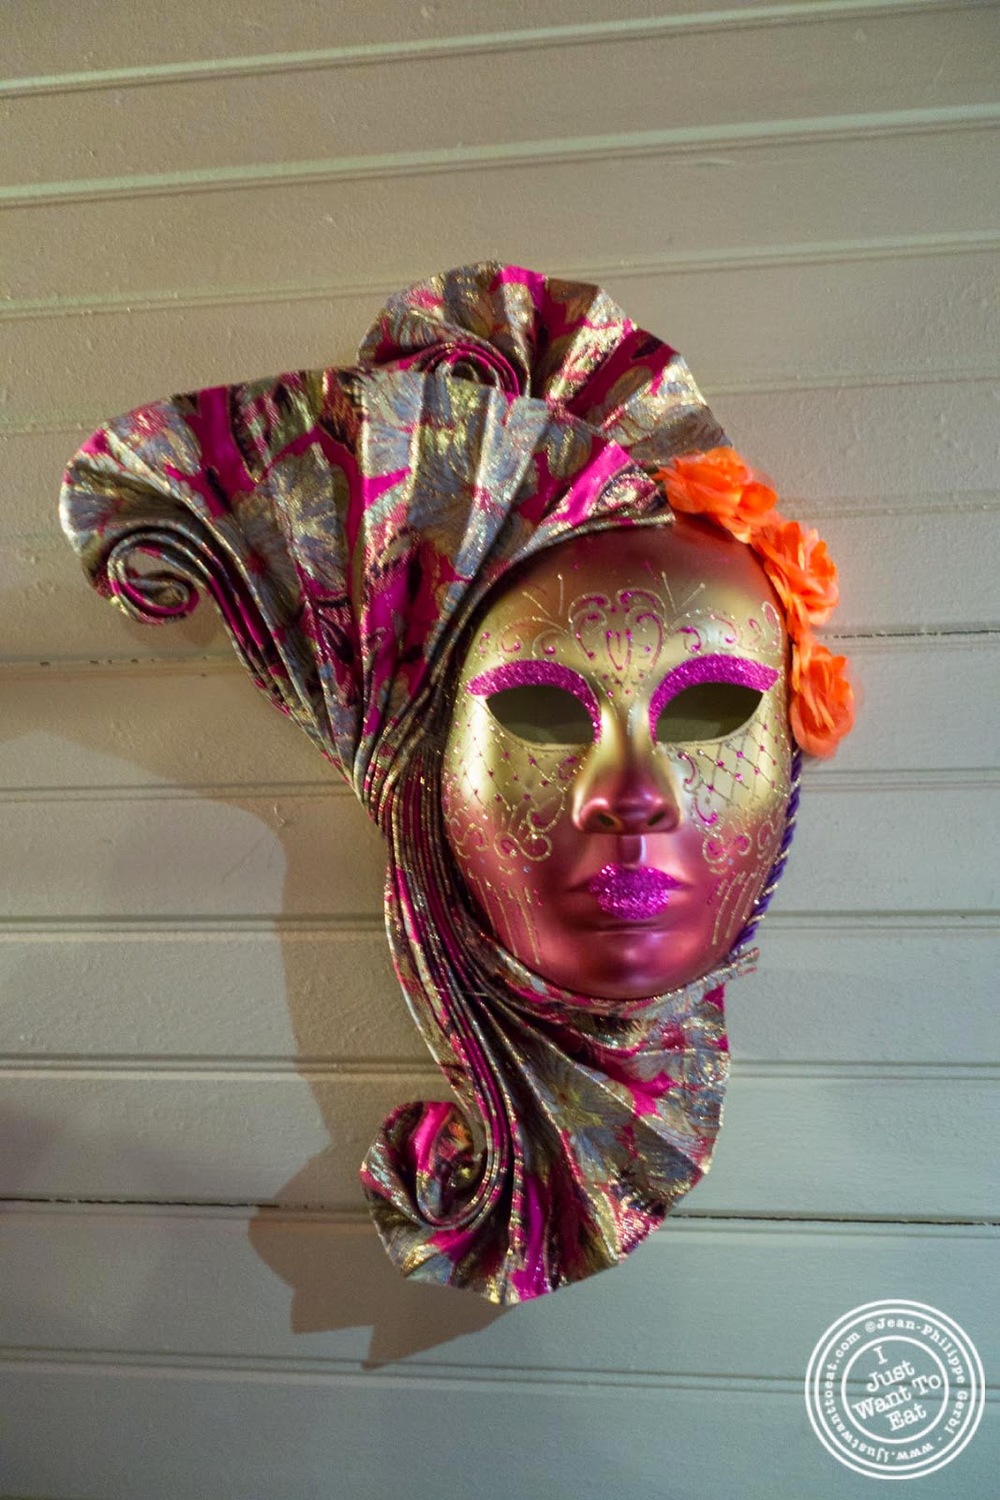 image of Mardi gras mask at MASQ New Orleans inspired cuisine in NYC, New York